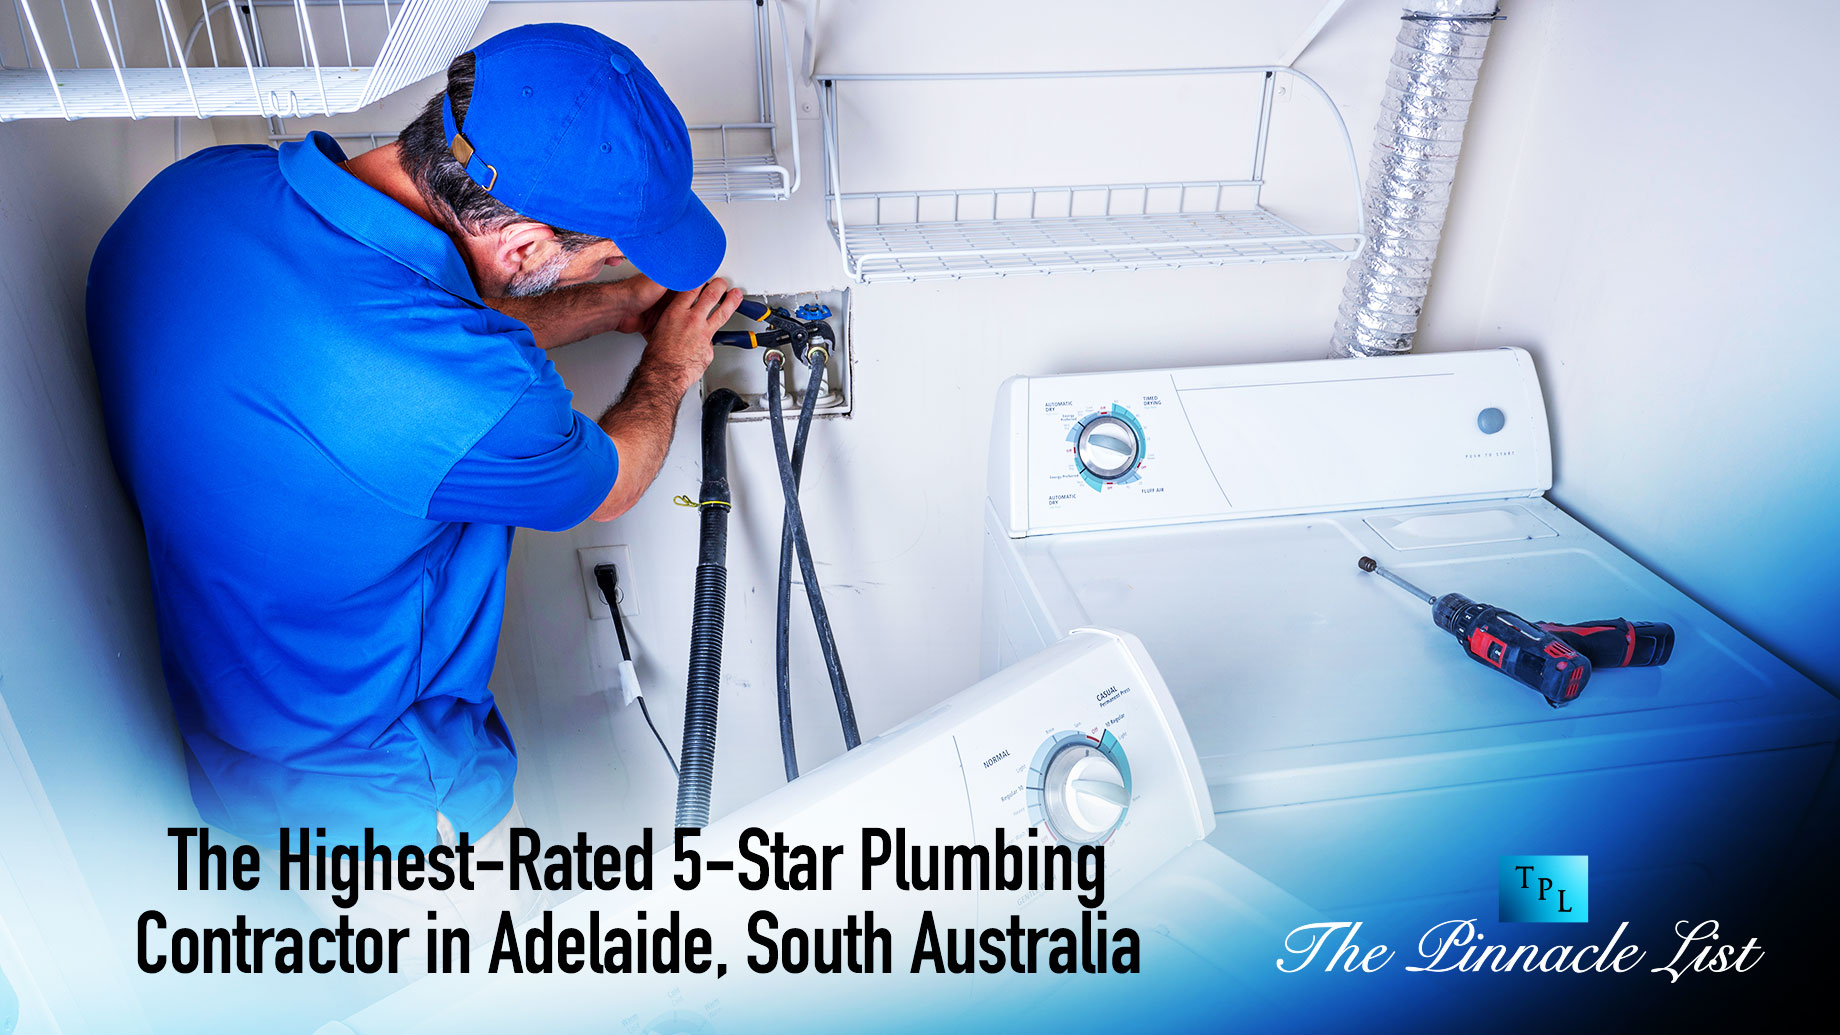 The Highest-Rated 5-Star Plumbing Contractor in Adelaide, South Australia